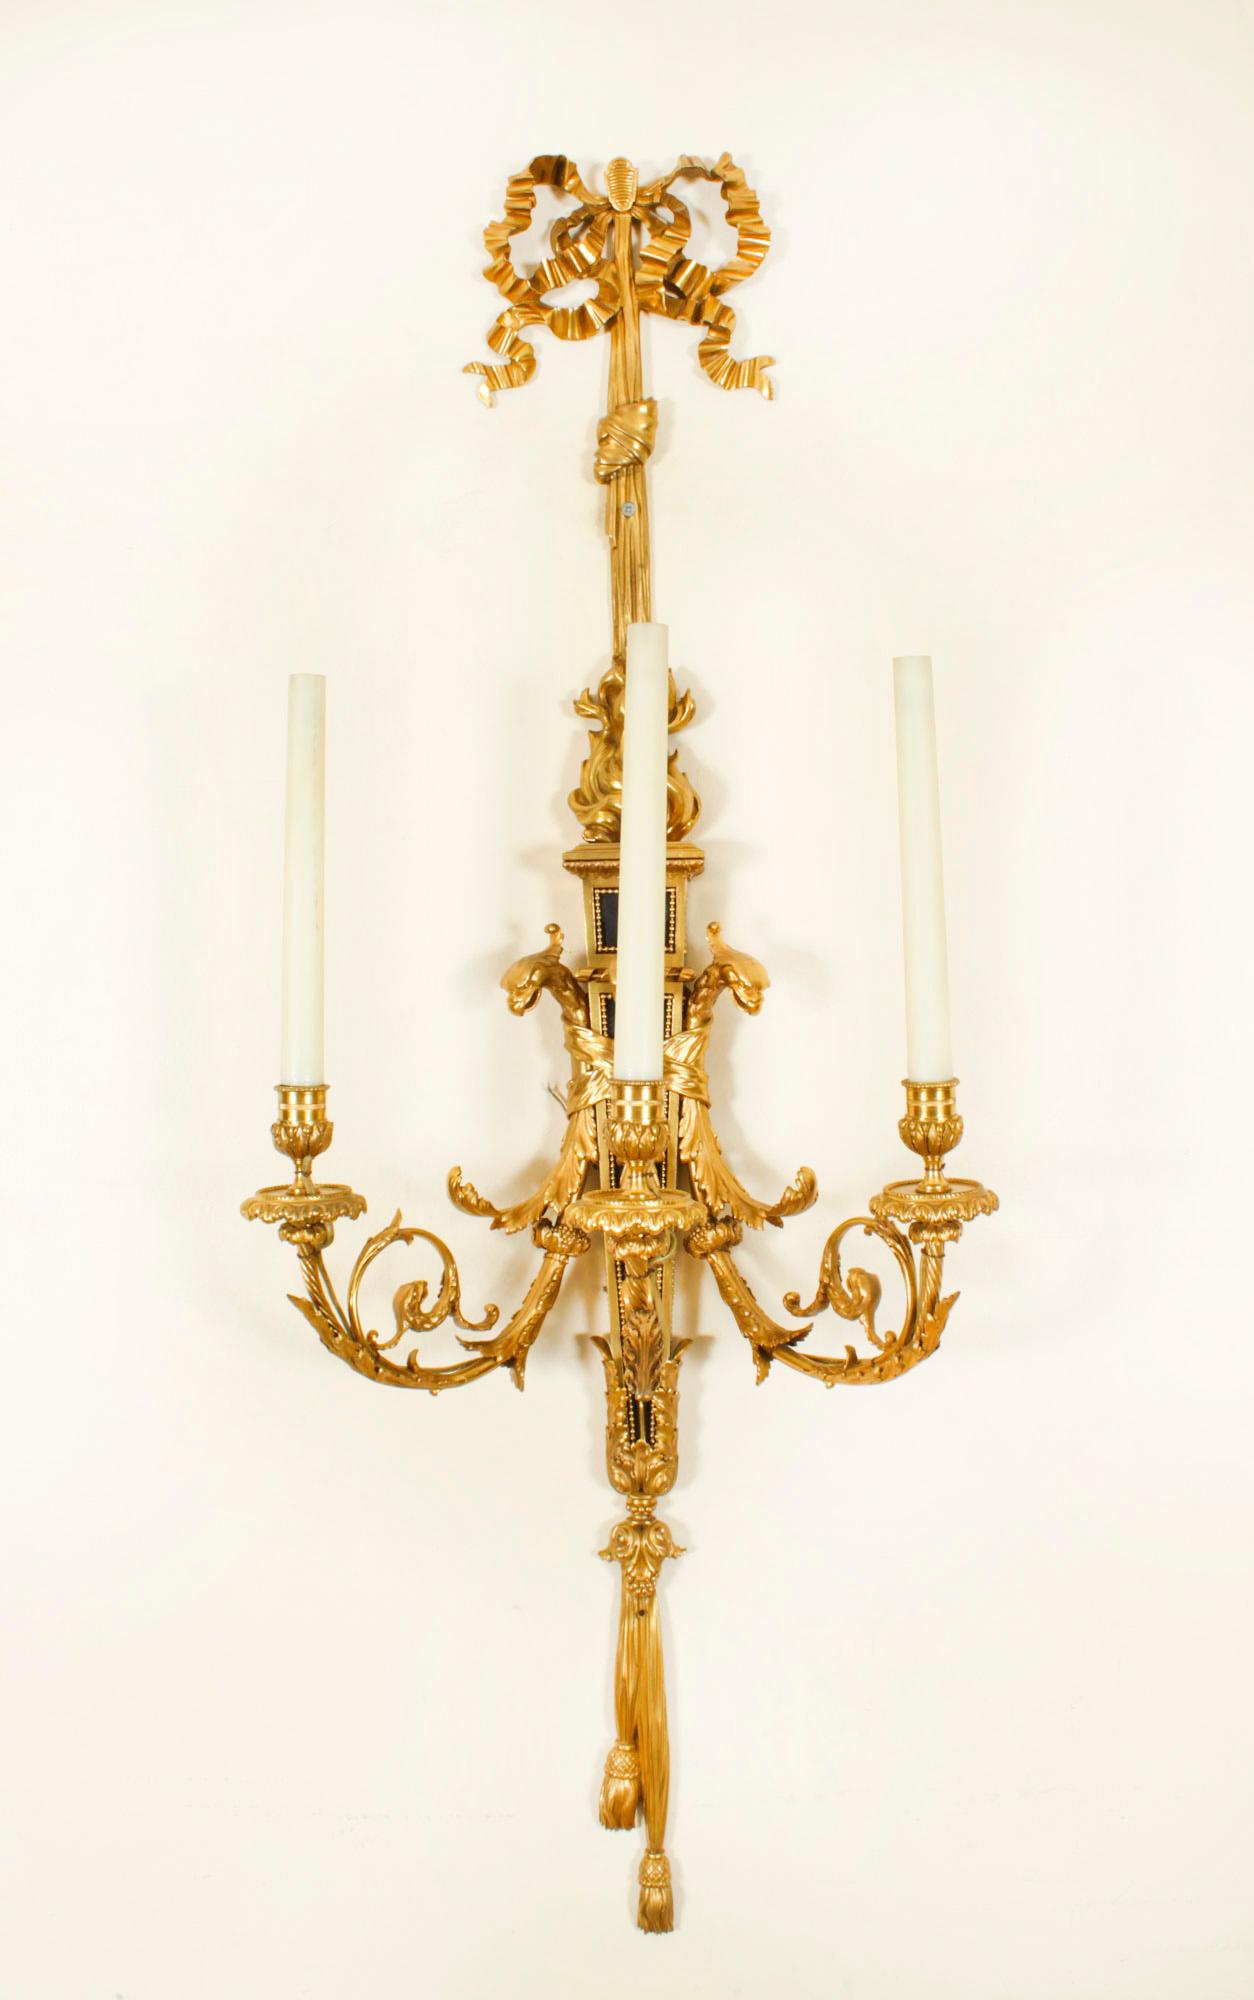 This is a monumental pair of antique French Louis XVI Revival gilt and patinated bronze three branch wall appliques, late 19th century in date.

They each feature backplates surmounted with a ribbon tied bow and tassels above scrolling foliate